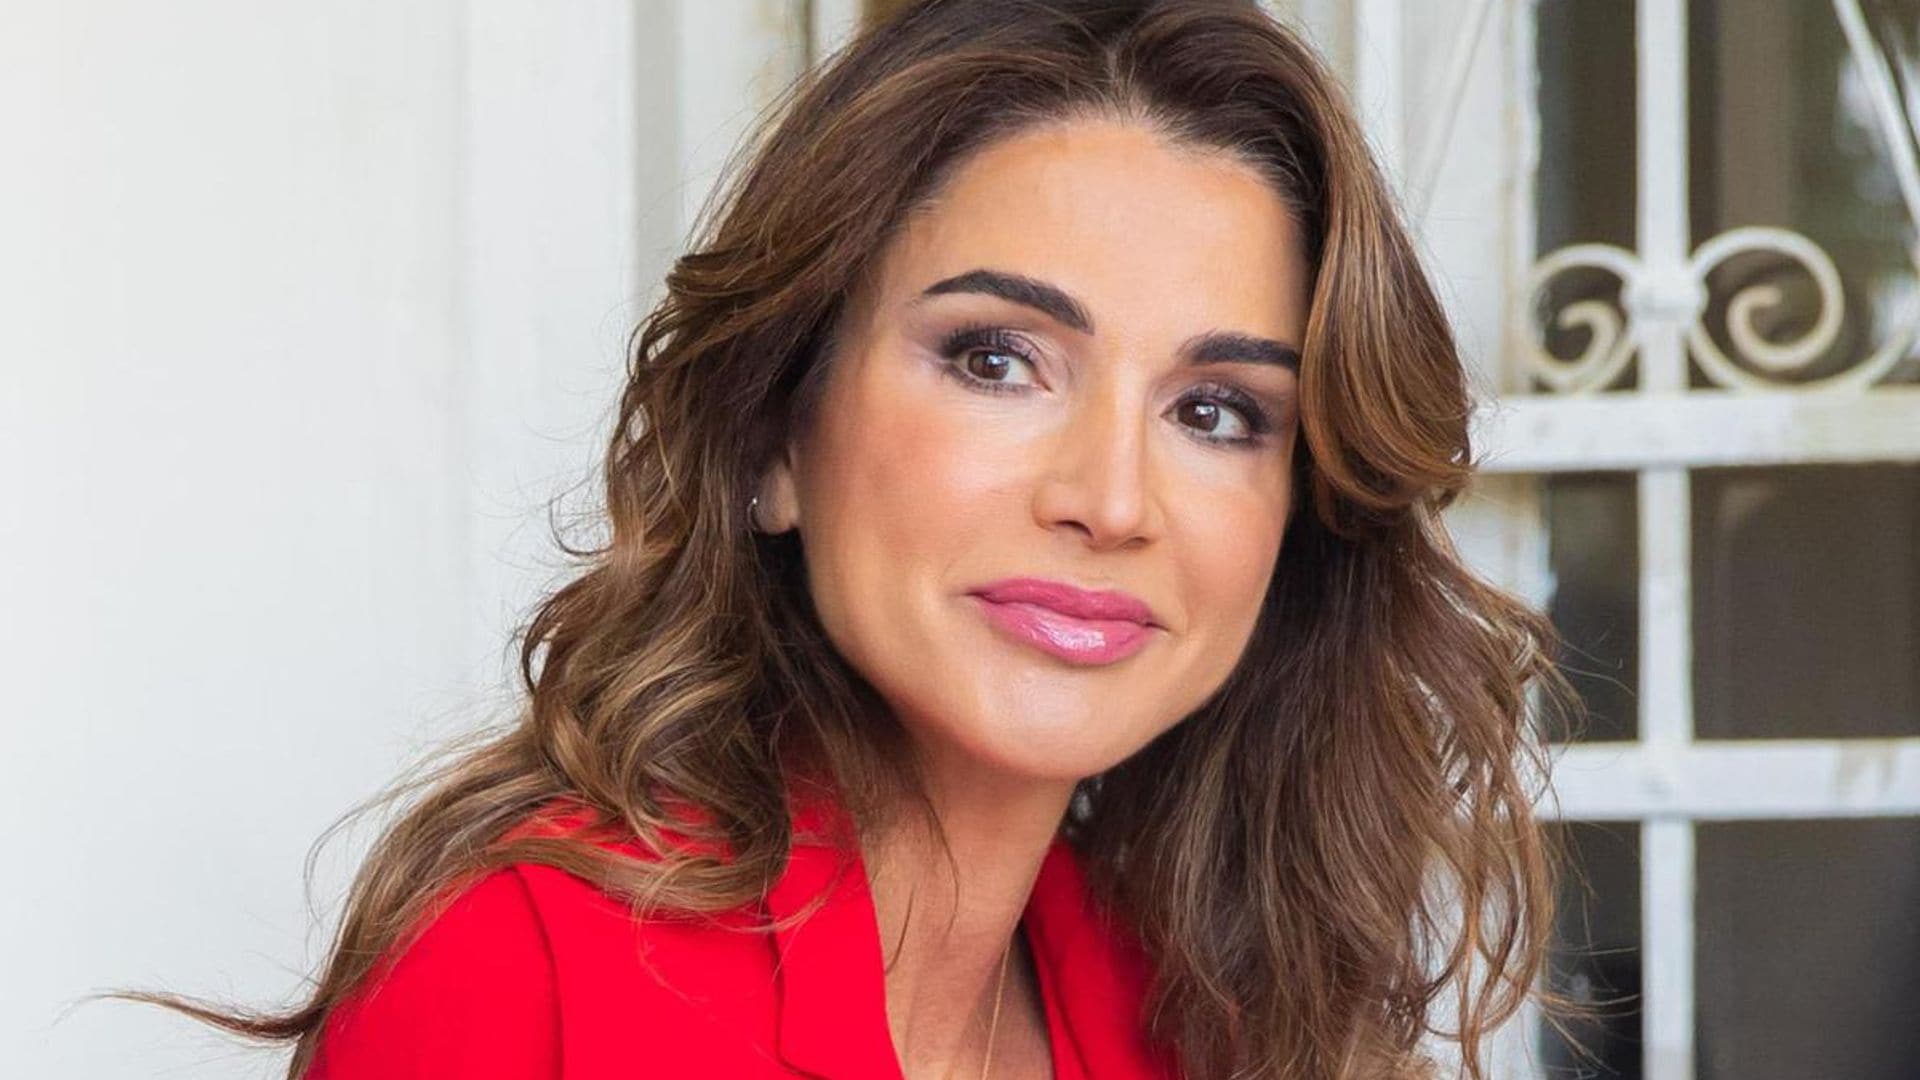 Queen Rania of Jordan celebrates mother's day with sweet photo